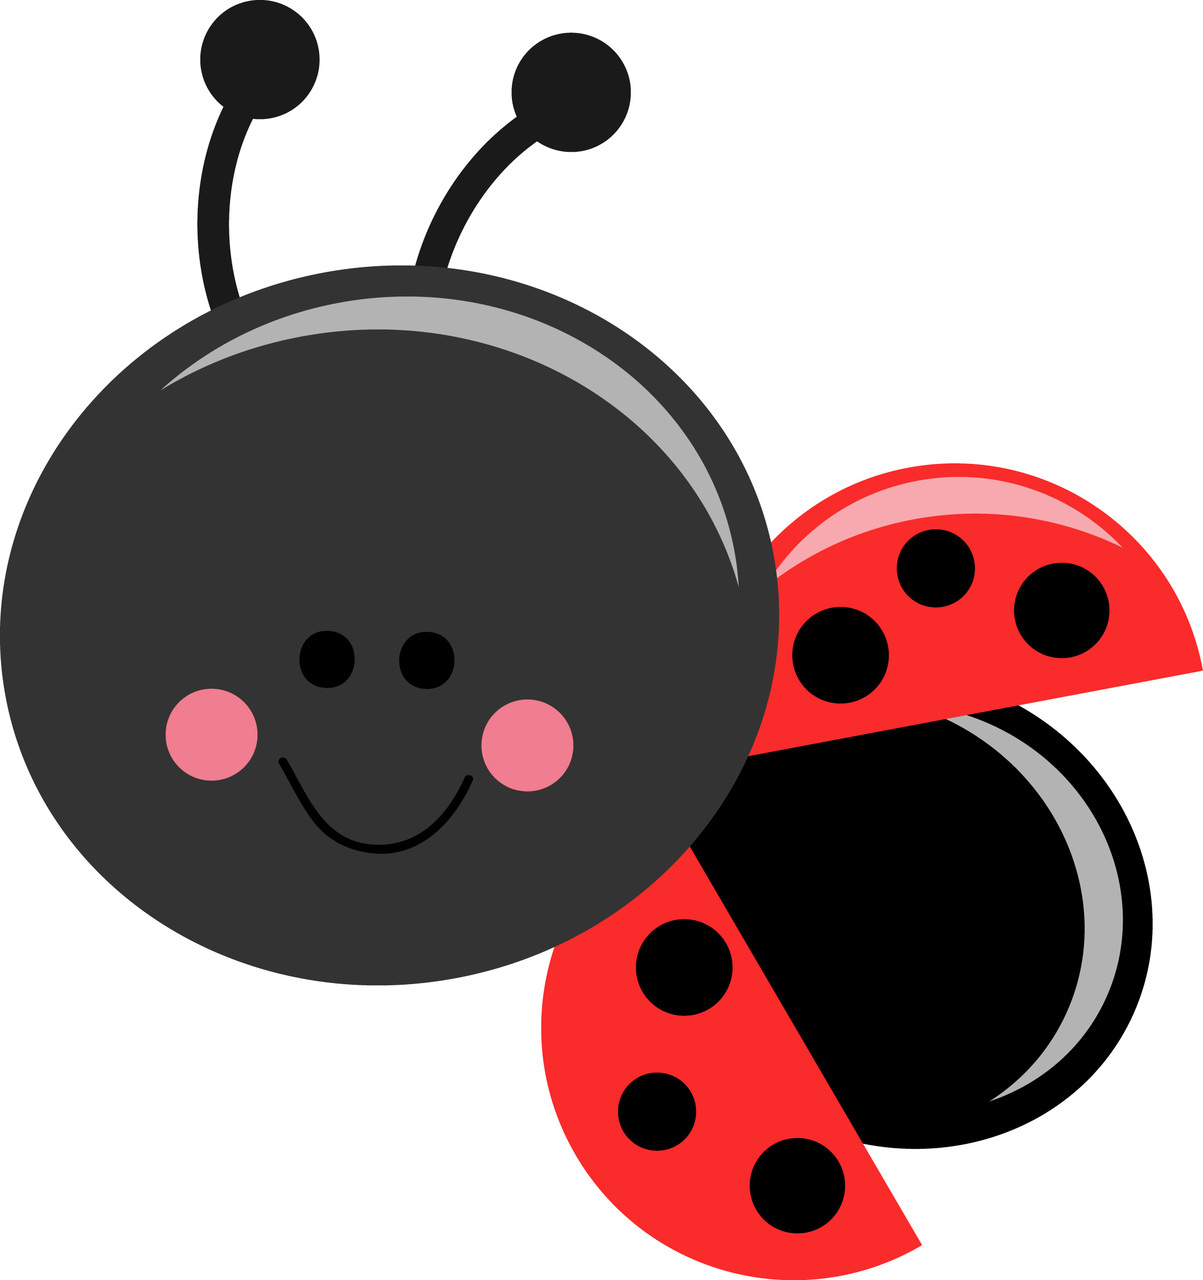 clipart pictures of ladybug - photo #10